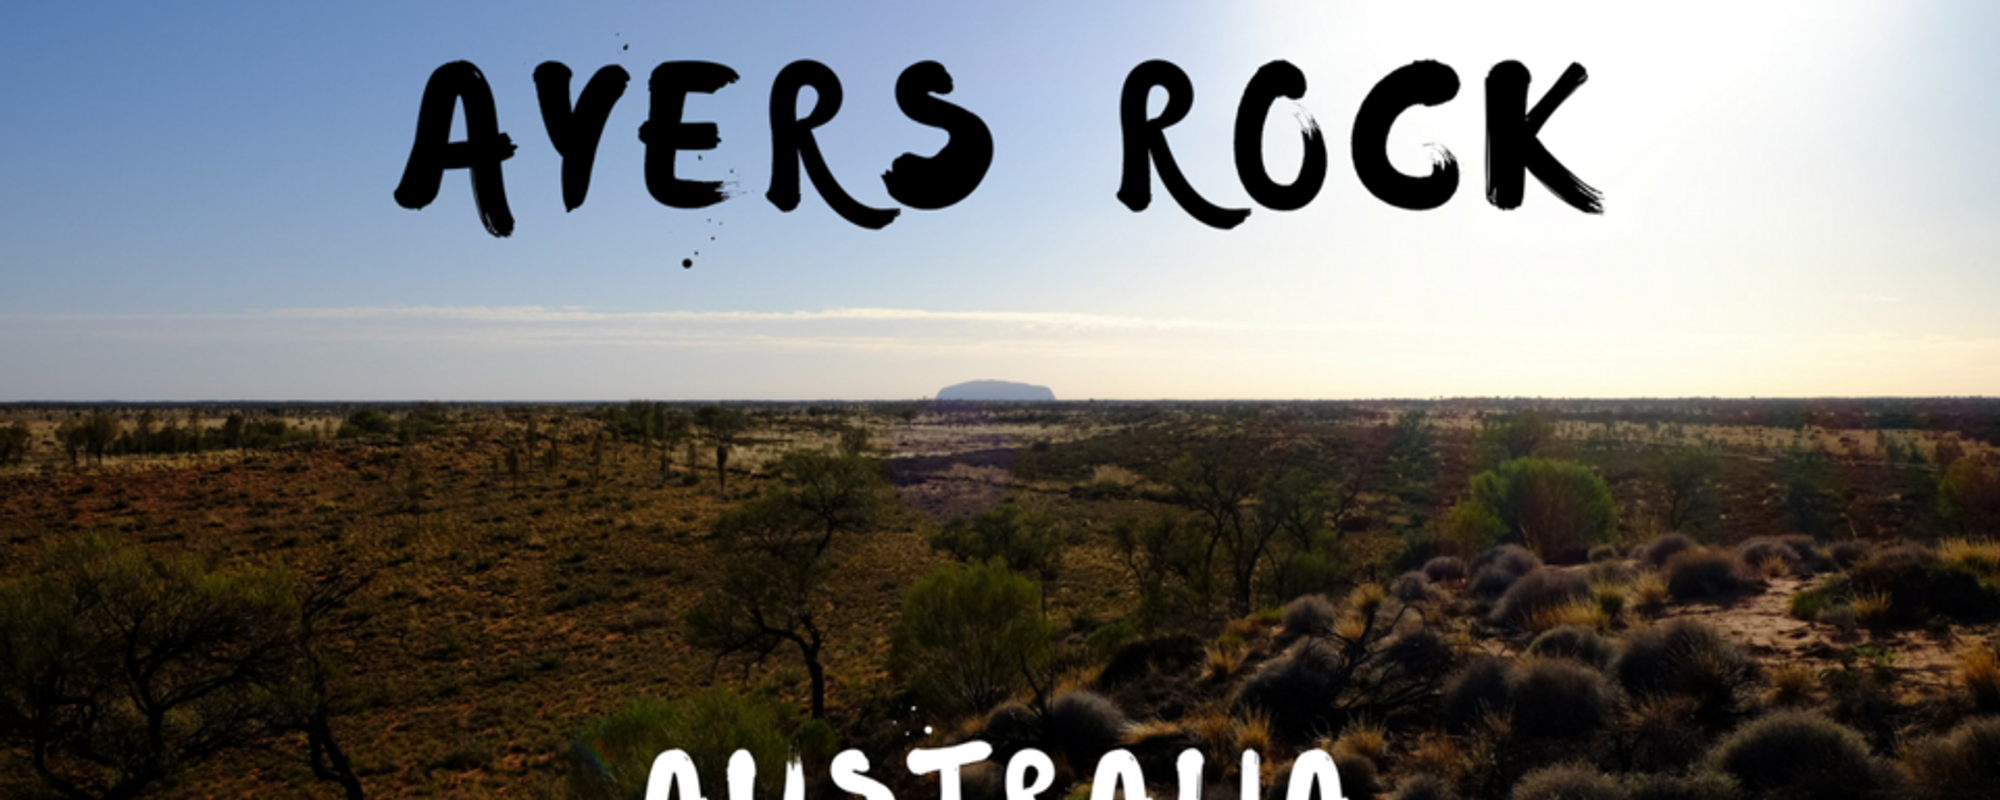 5 things you need to know before going to the Ayers Rock